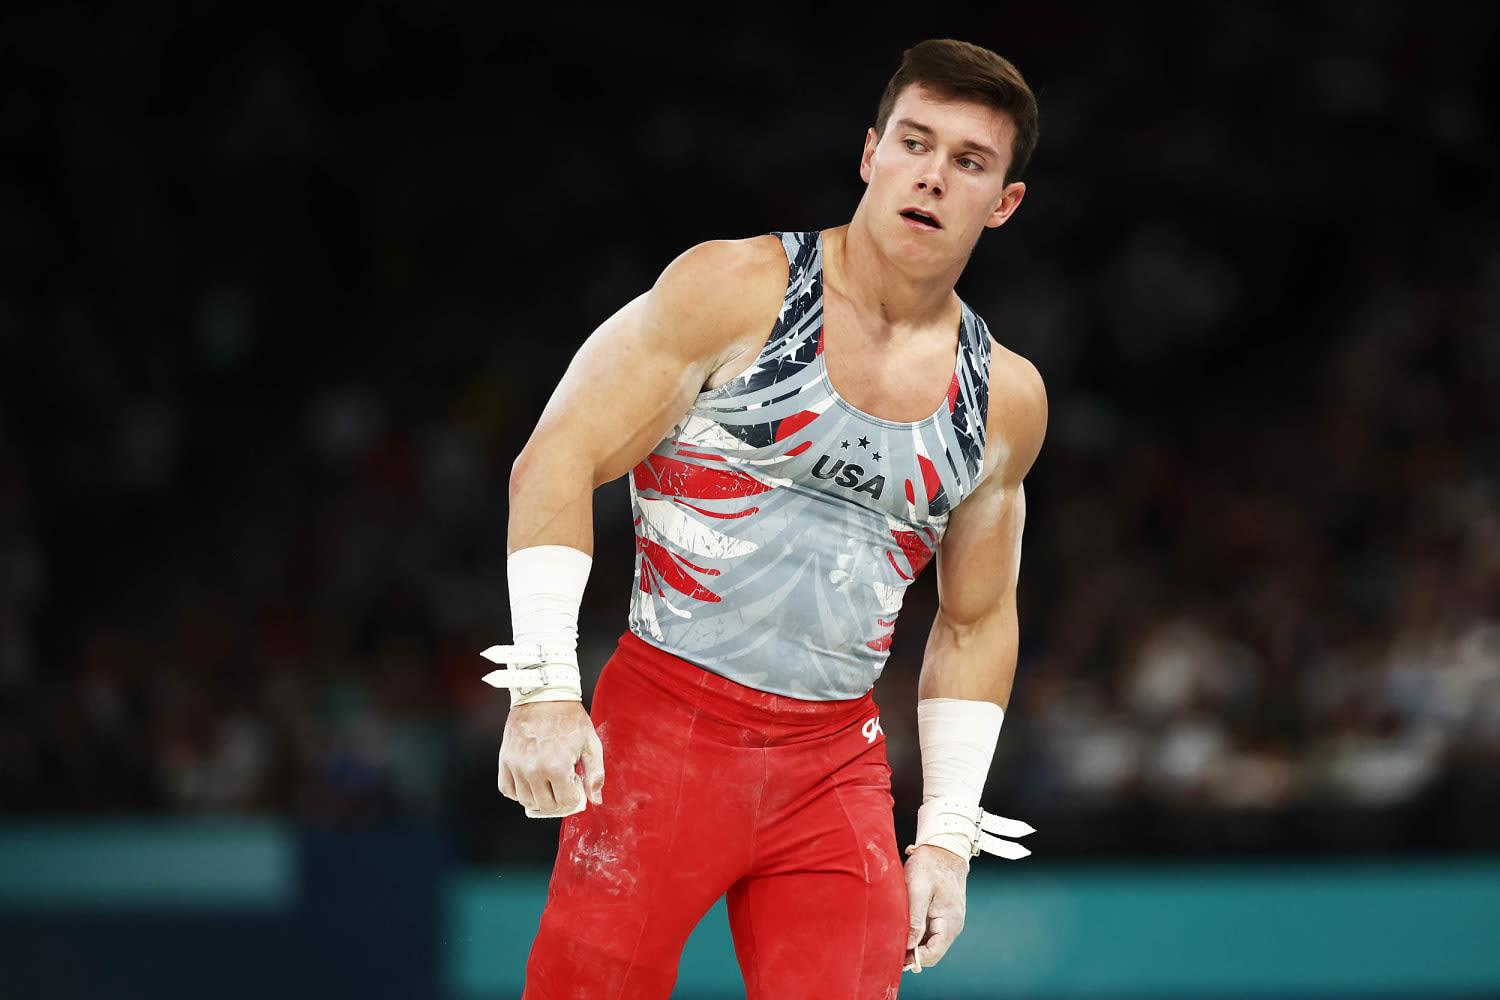 Brody Malone medals with the men’s gymnastics team one year after ‘catastrophic’ injury. Here's what happened